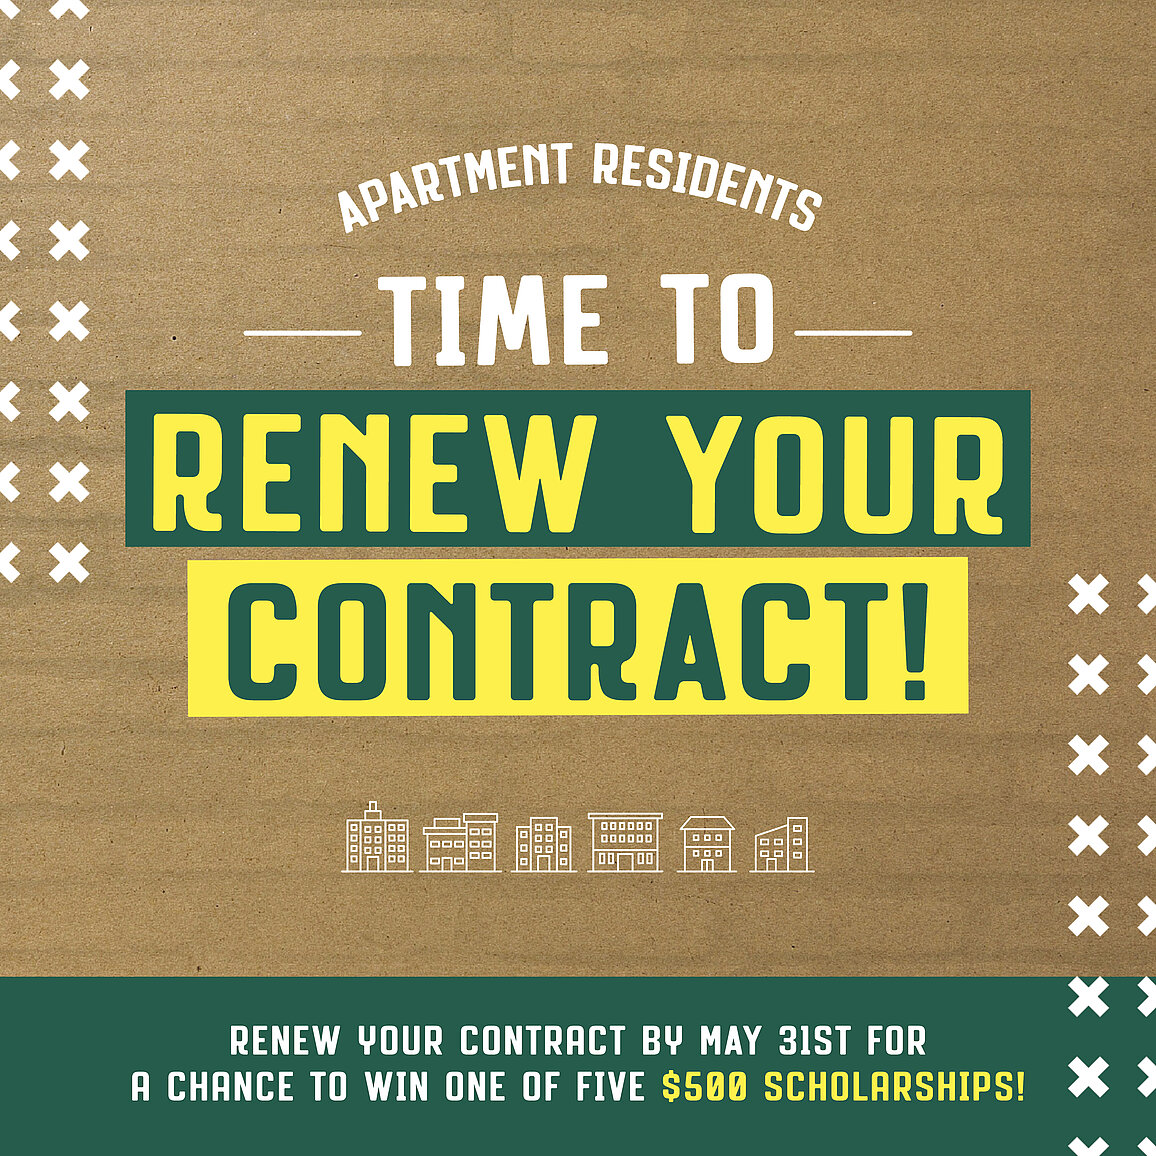 Apartment Residents its time to renew your contract